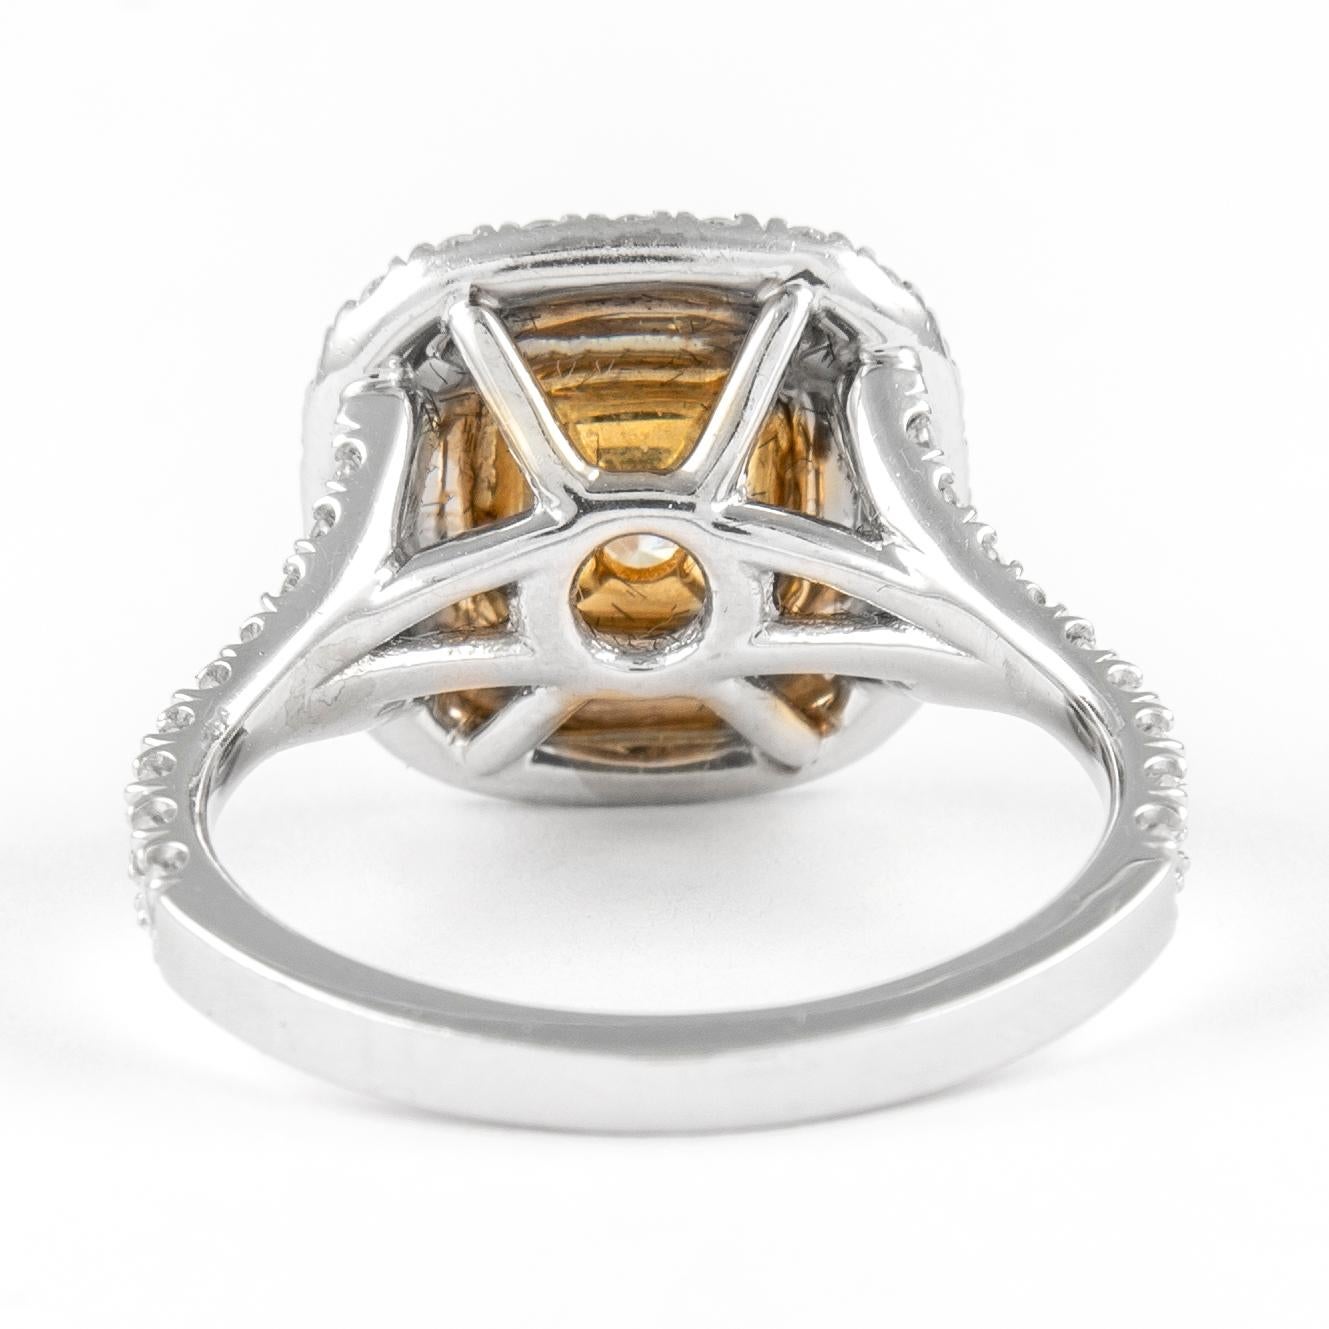 Alexander 2.12ctt Fancy Yellow VS2 Diamond Double Halo Ring 18k Two Tone In New Condition For Sale In BEVERLY HILLS, CA